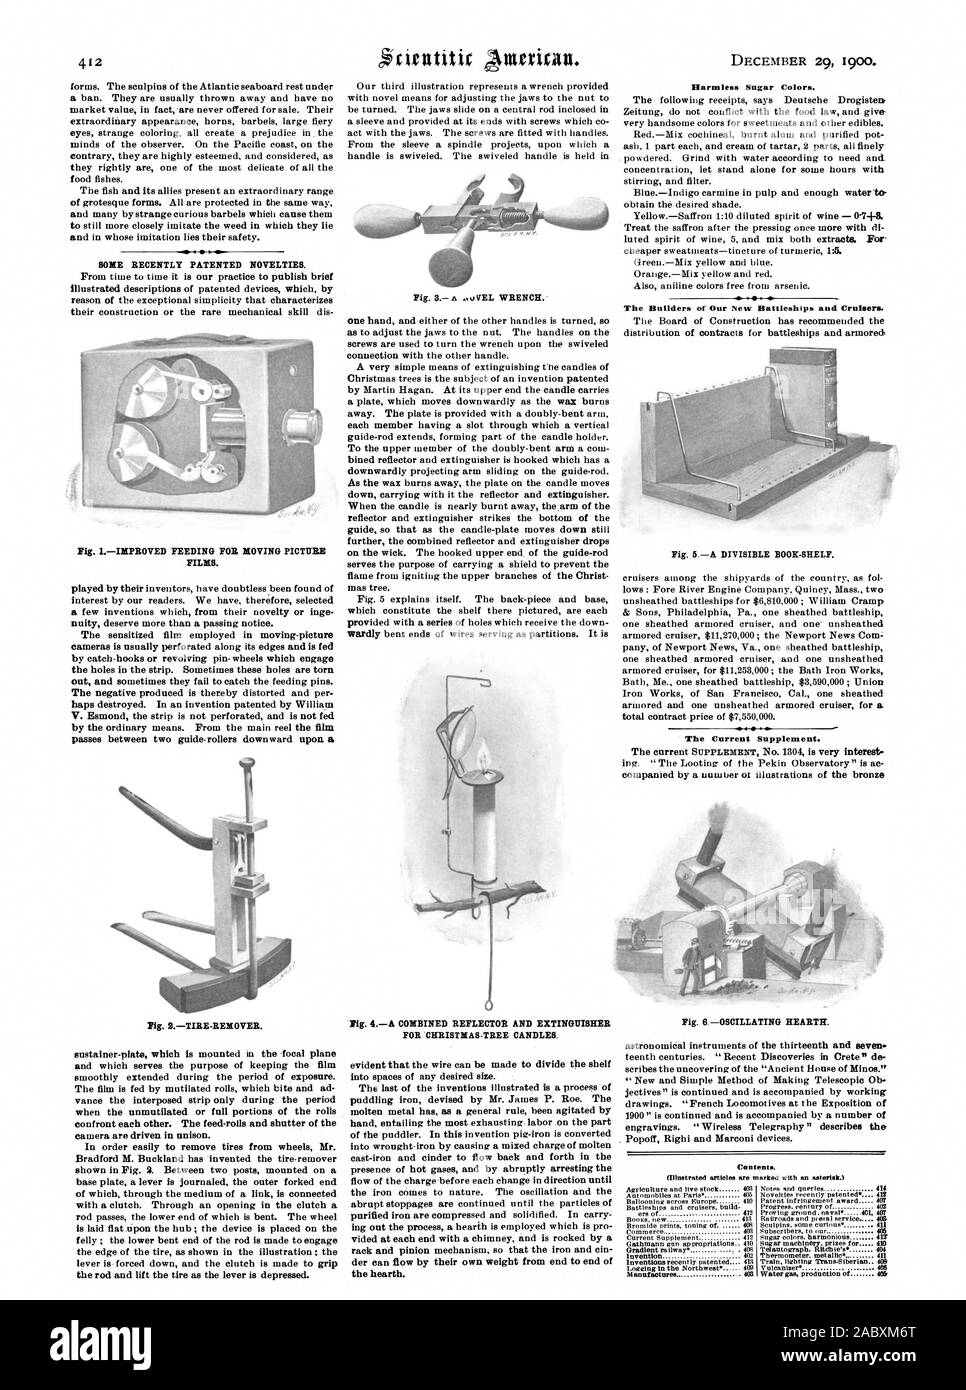 Logging in the Northwest 409 406 Manufactures 403 Water gas production of 409, scientific american, 1900-12-11 Stock Photo